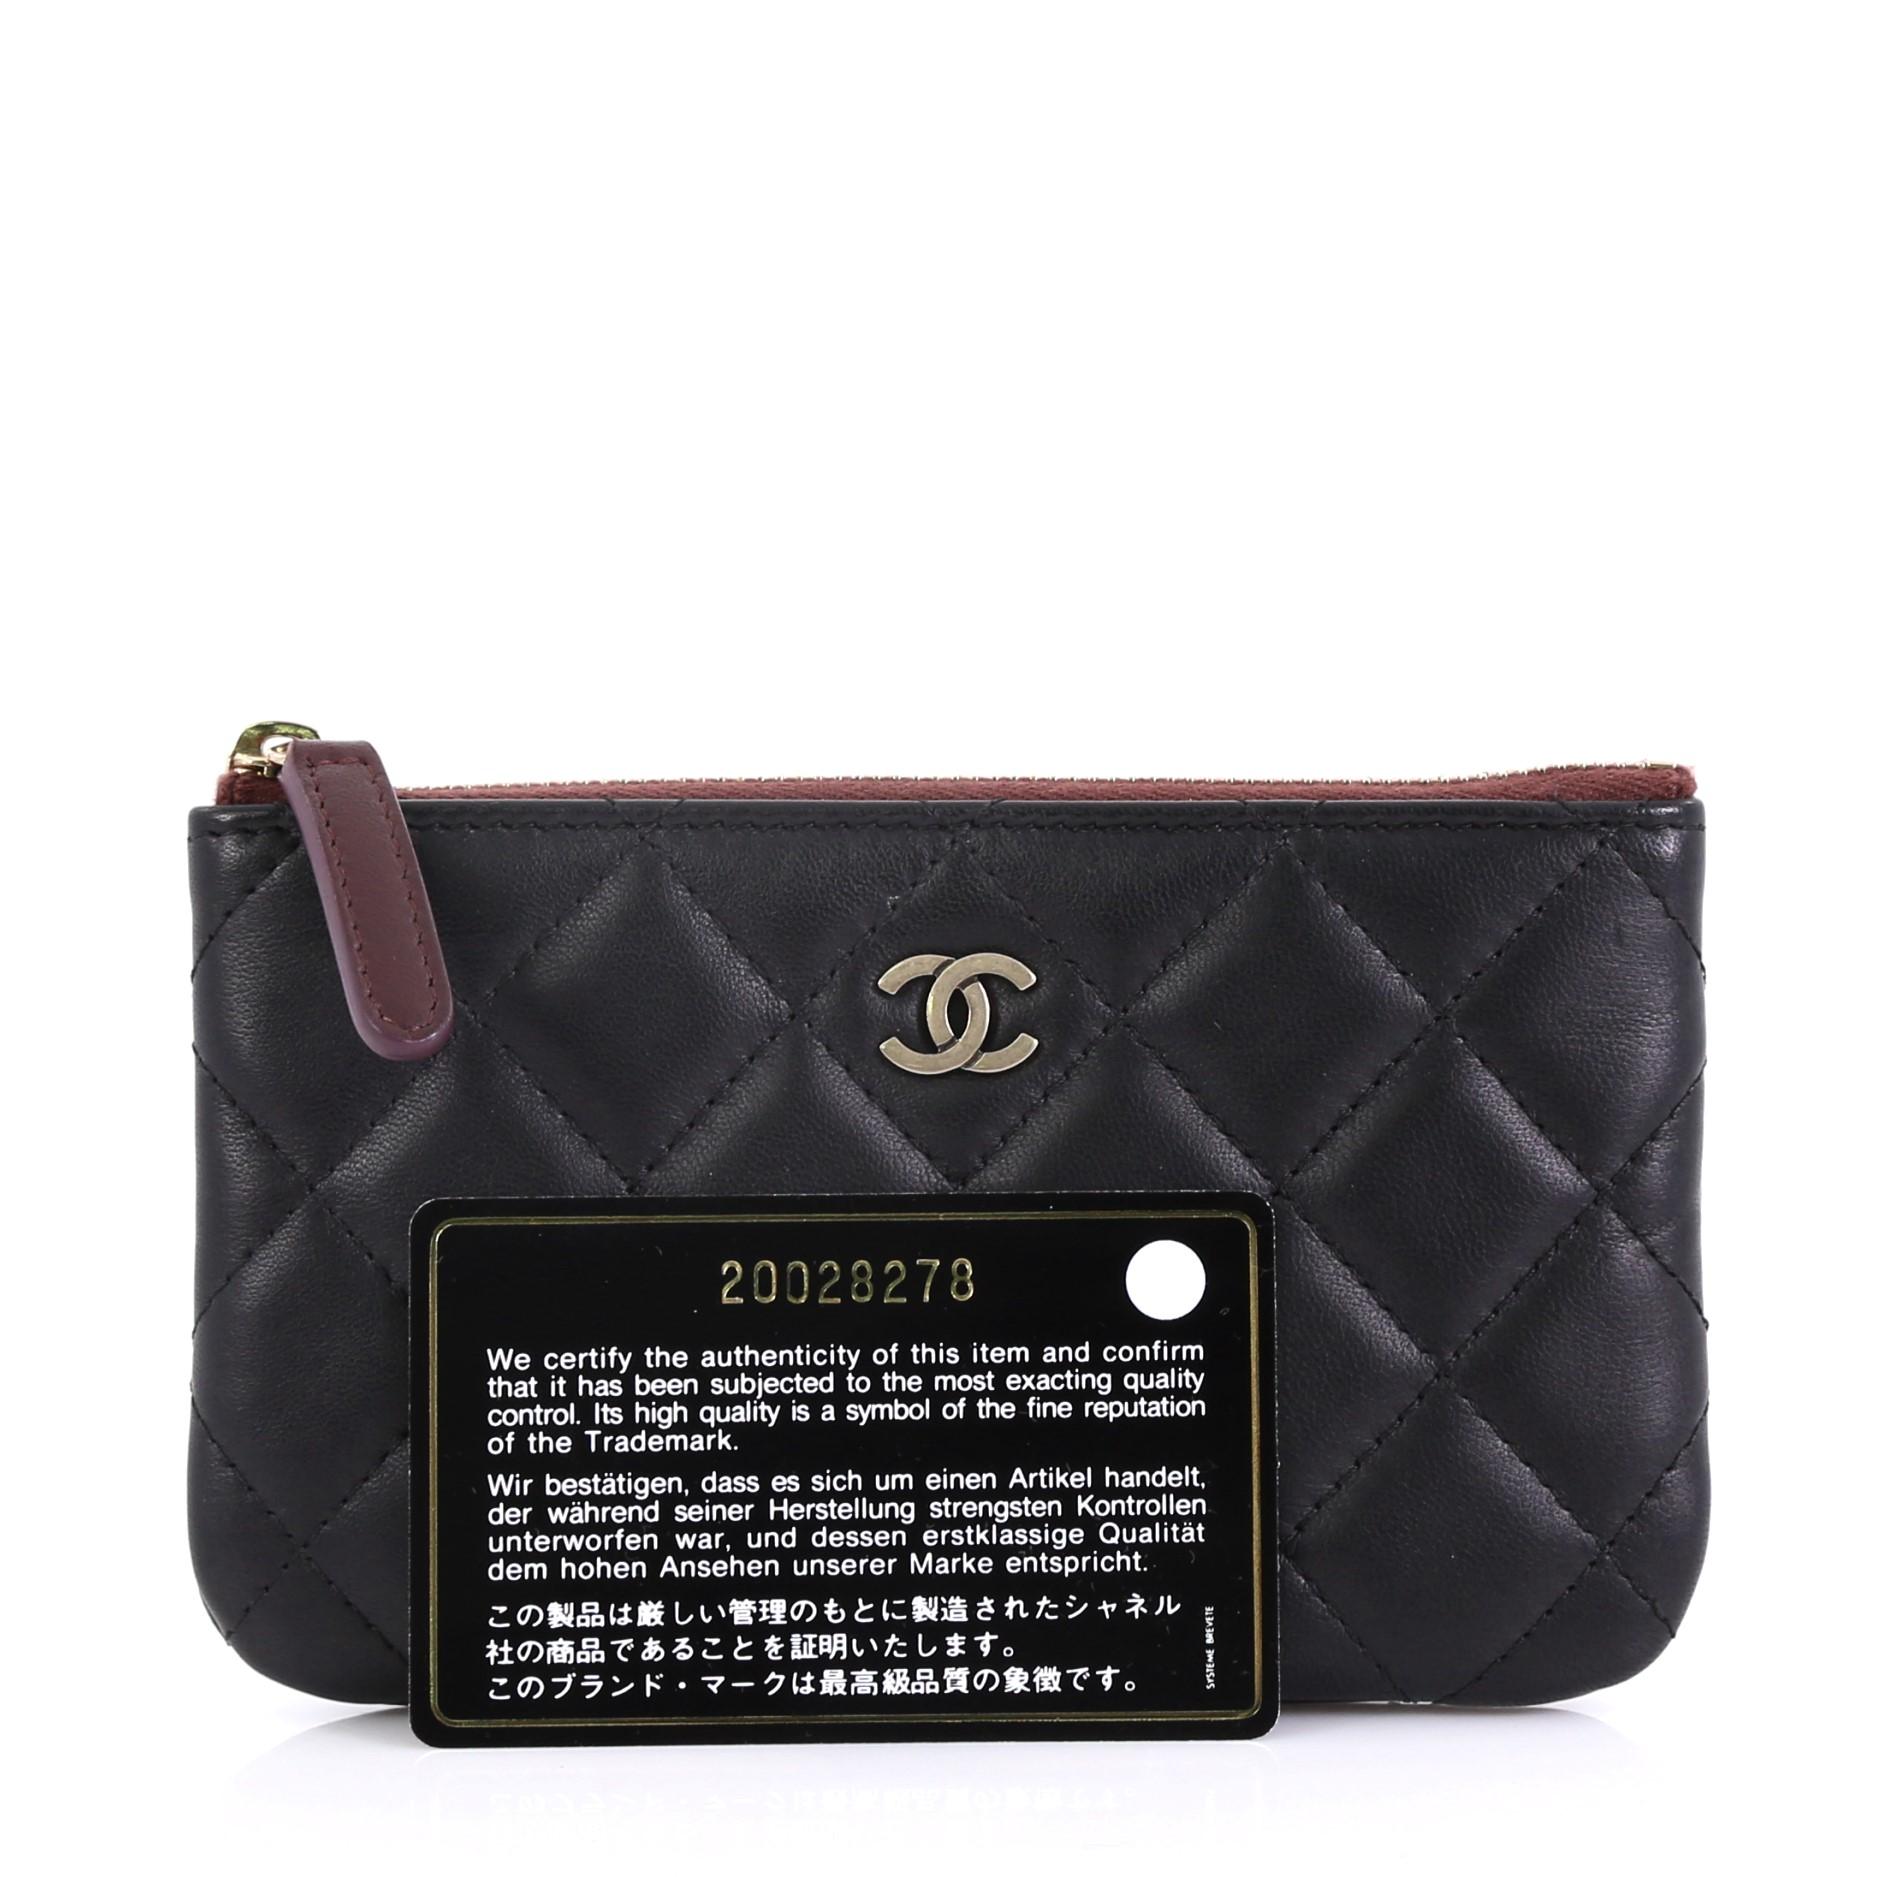 This Chanel Classic O Case Pouch Quilted Lambskin Mini, crafted from black quilted lambskin leather, features CC logo at front and gold-tone hardware. Its zip closure opens to a burgundy quilted nylon interior. Hologram sticker reads: 20028278.